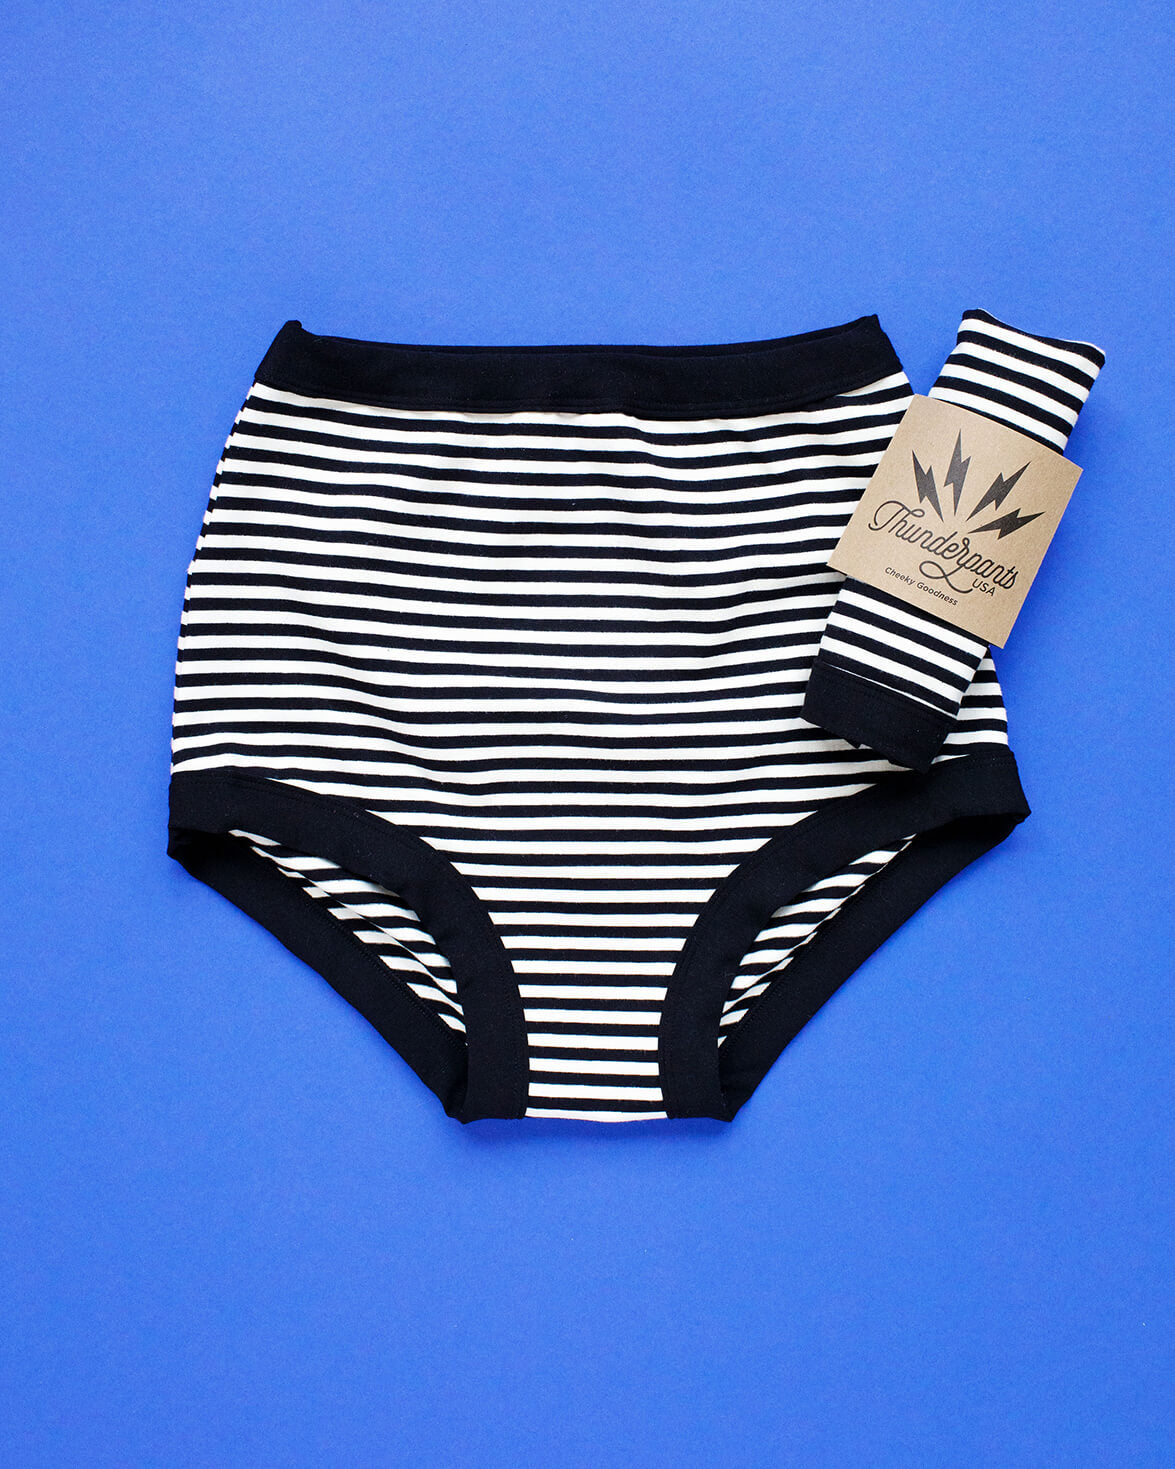 Flat lay of Thunderpants Sky Rise style underwear in Black and White Stripe.